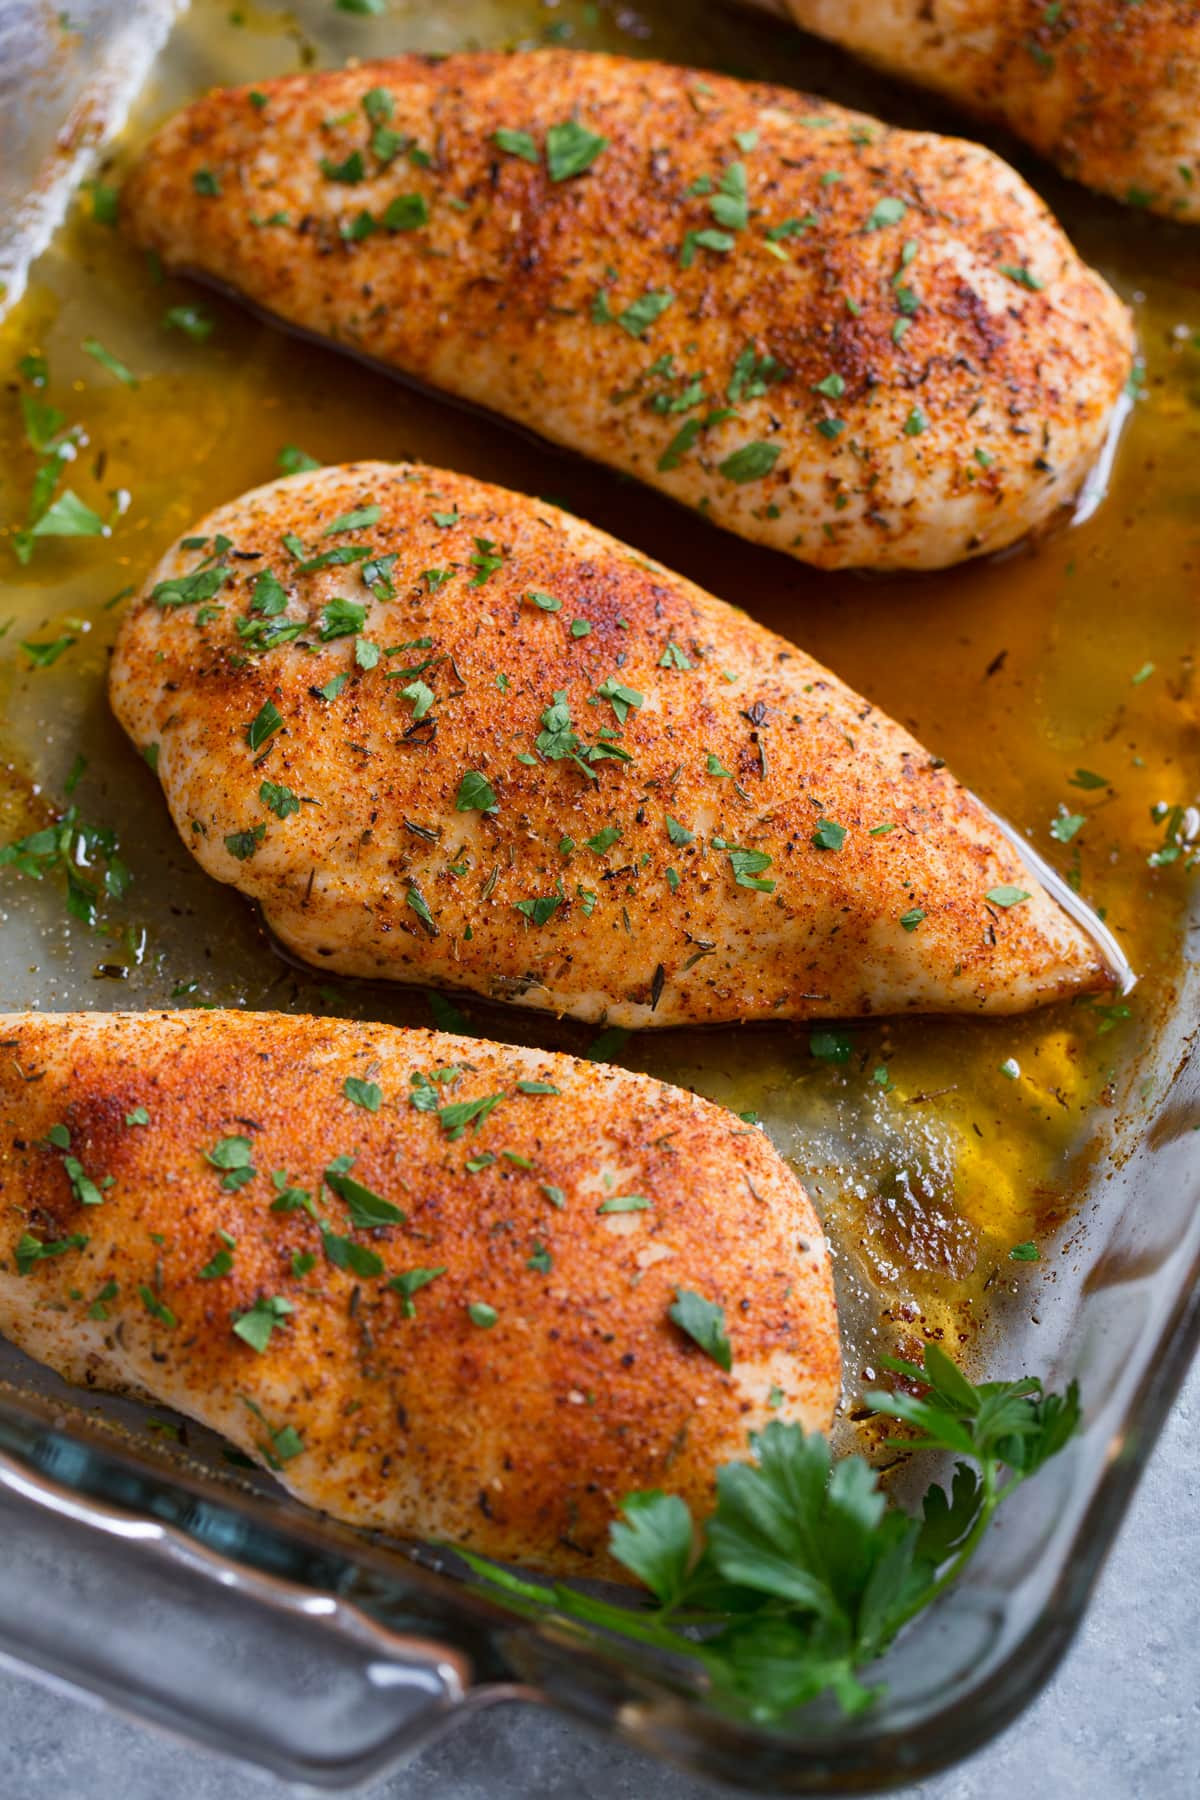 The Best Ideas for Baked Chicken Breast Fillets - Home, Family, Style and Art Ideas